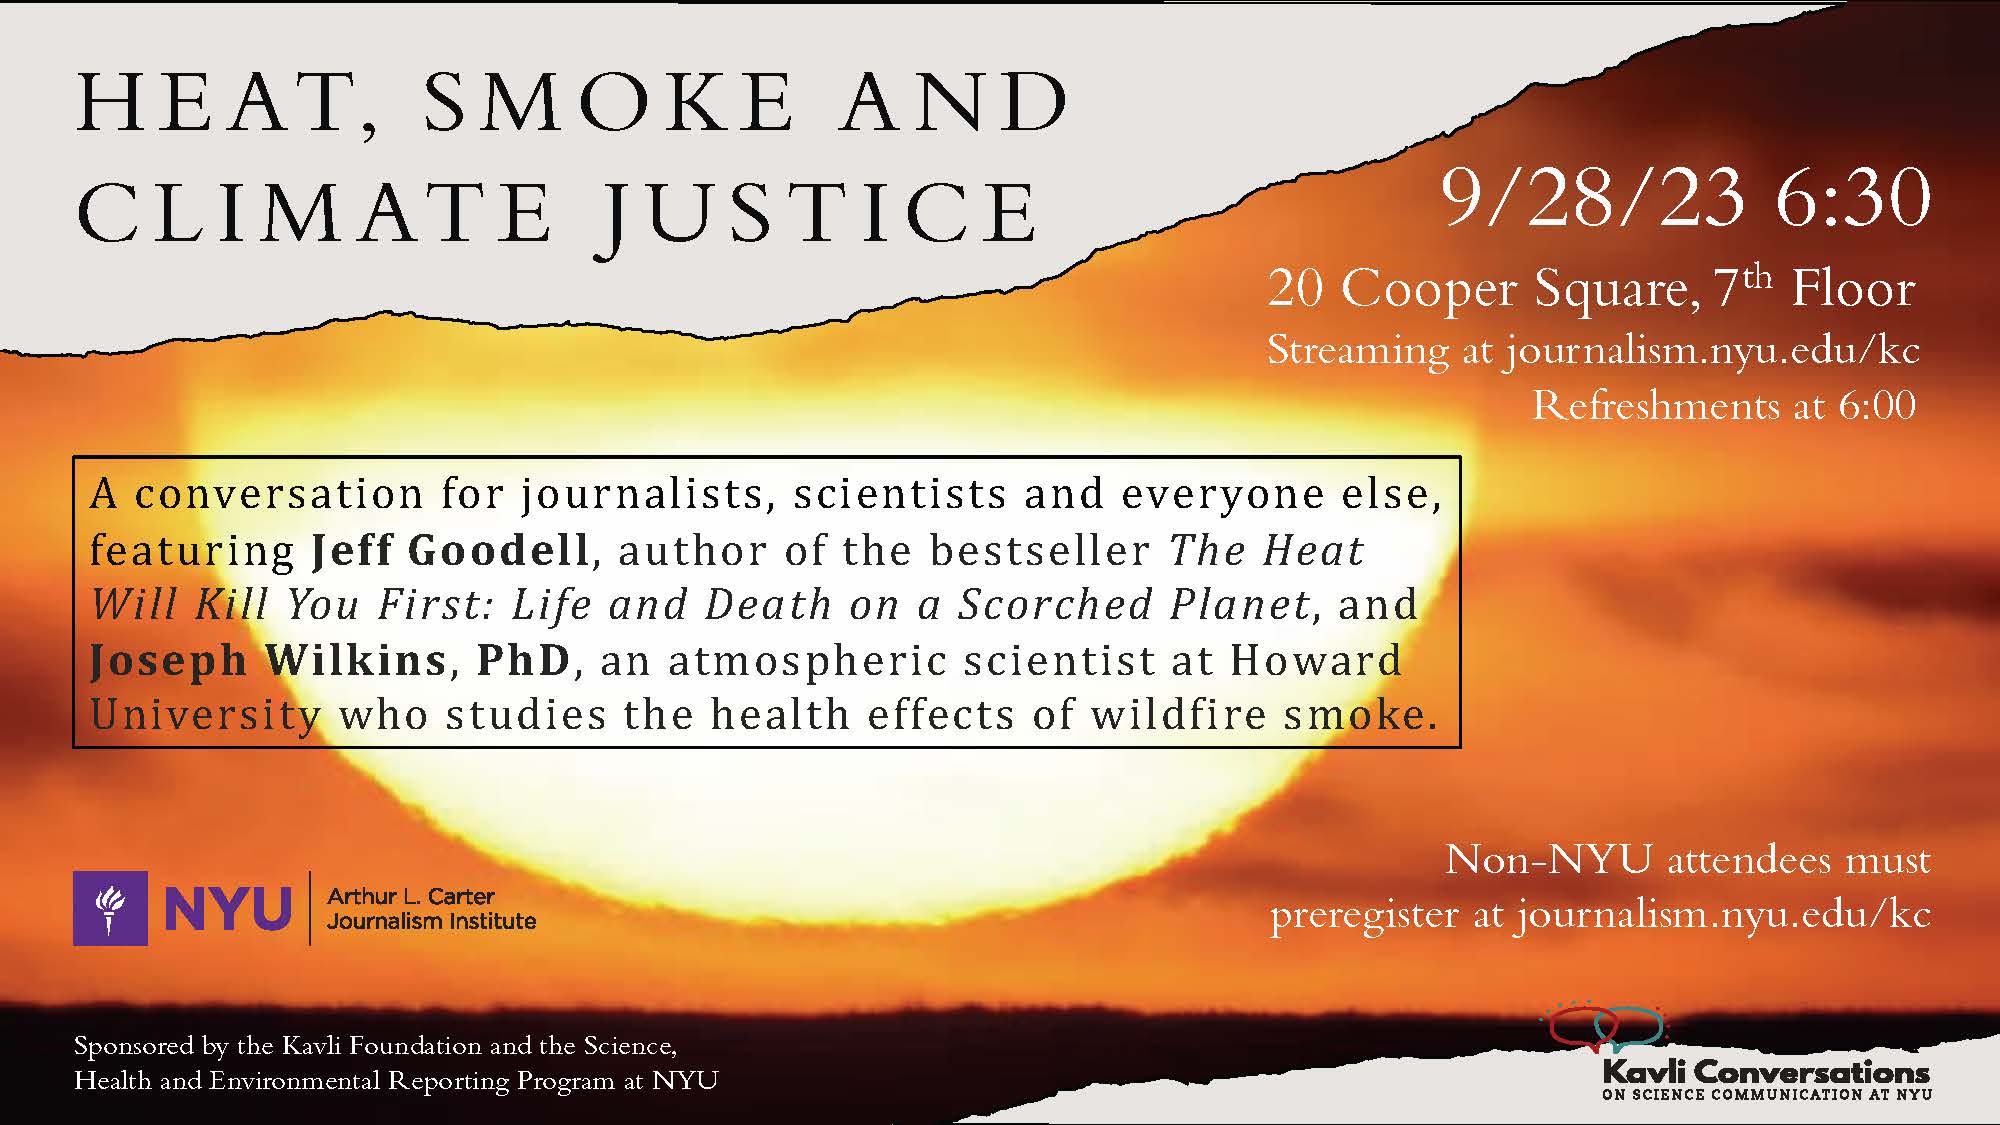 Heat, smoke, and climate justice poster